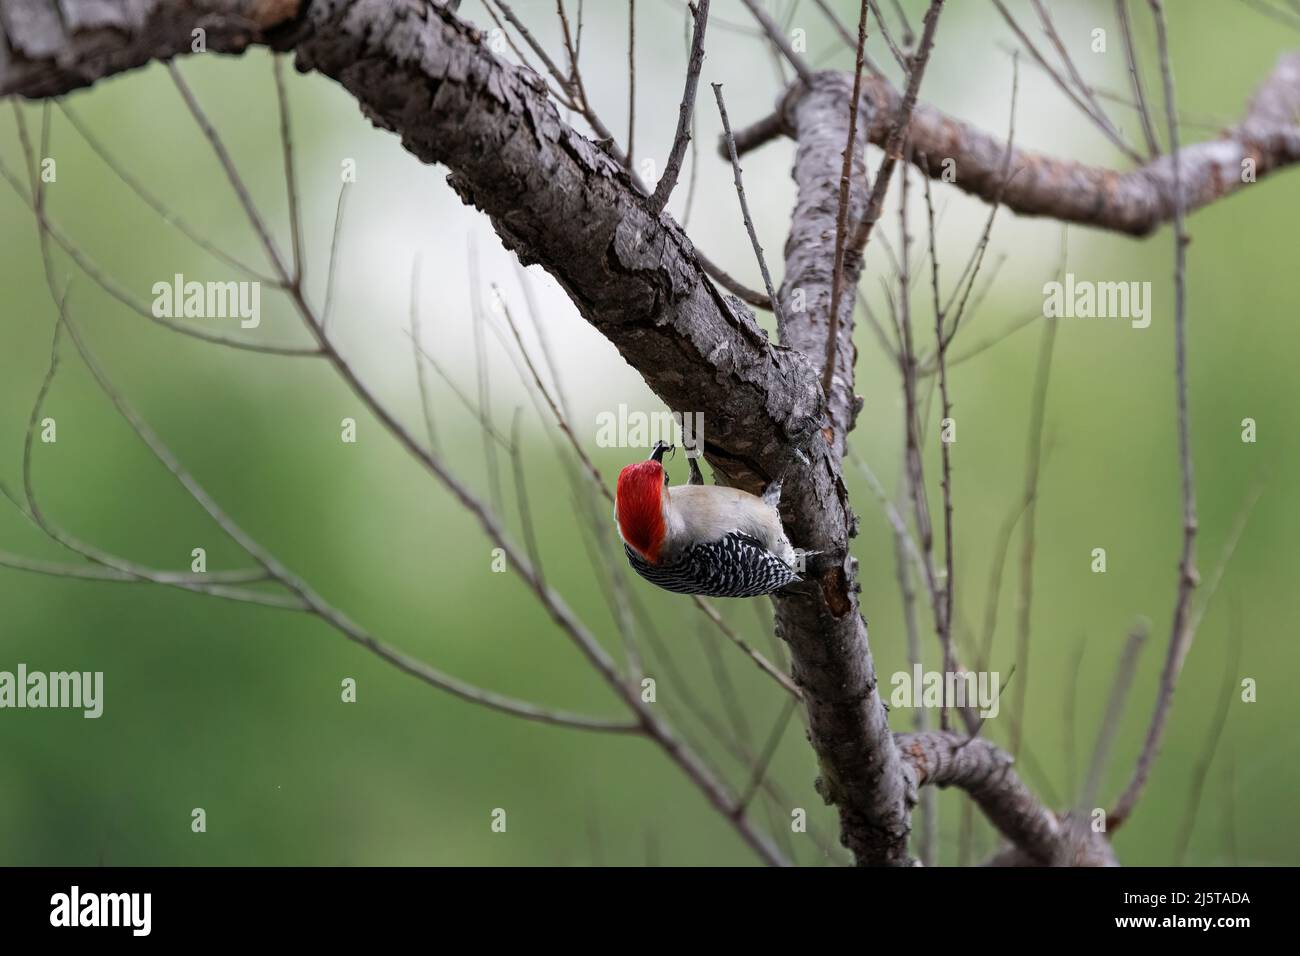 A male Red-bellied Woodpecker with an insect in its beak while using its sharp claws to hang on the underside of a tree branch. Stock Photo